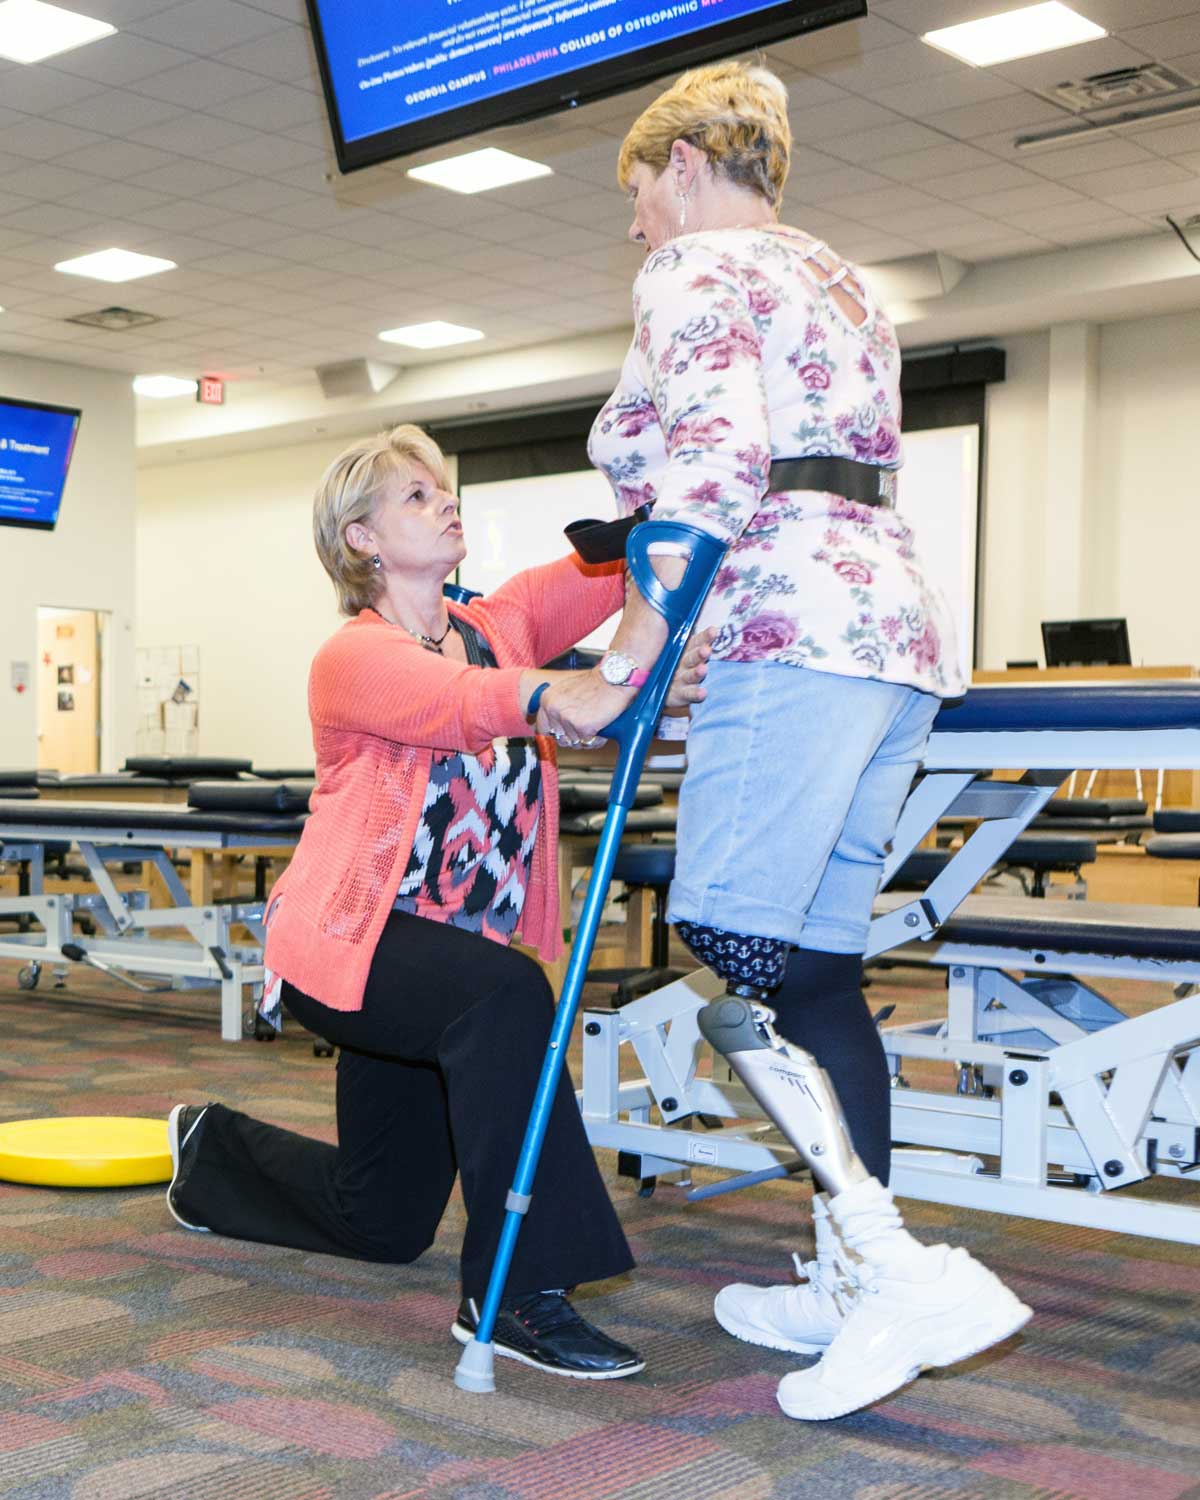 A physical therapist helps a patient with exercises.